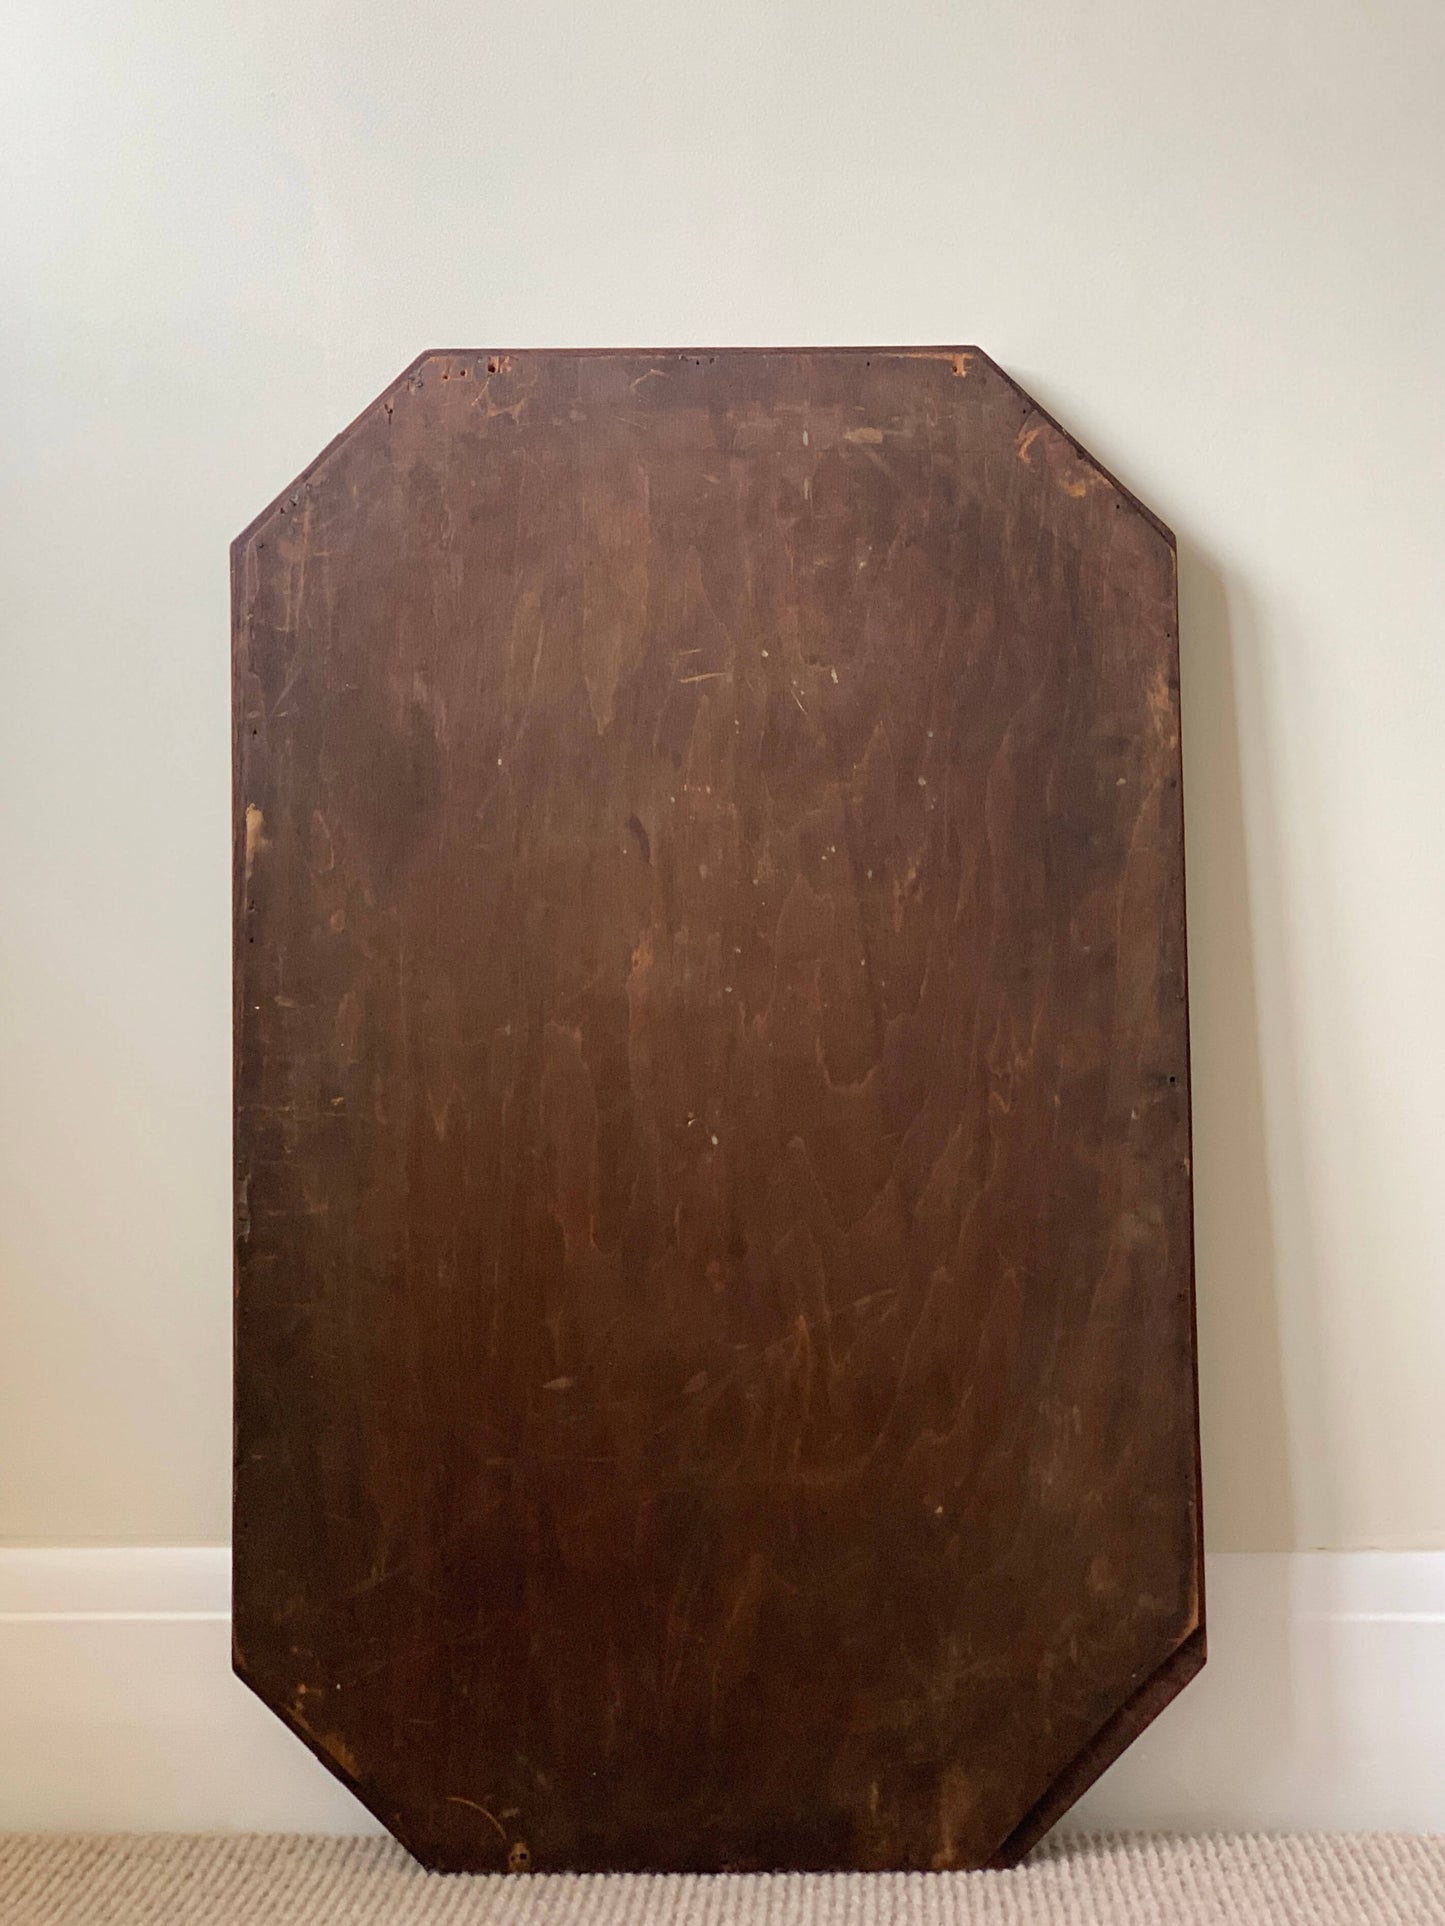 Antique octagonal mirror with carved details